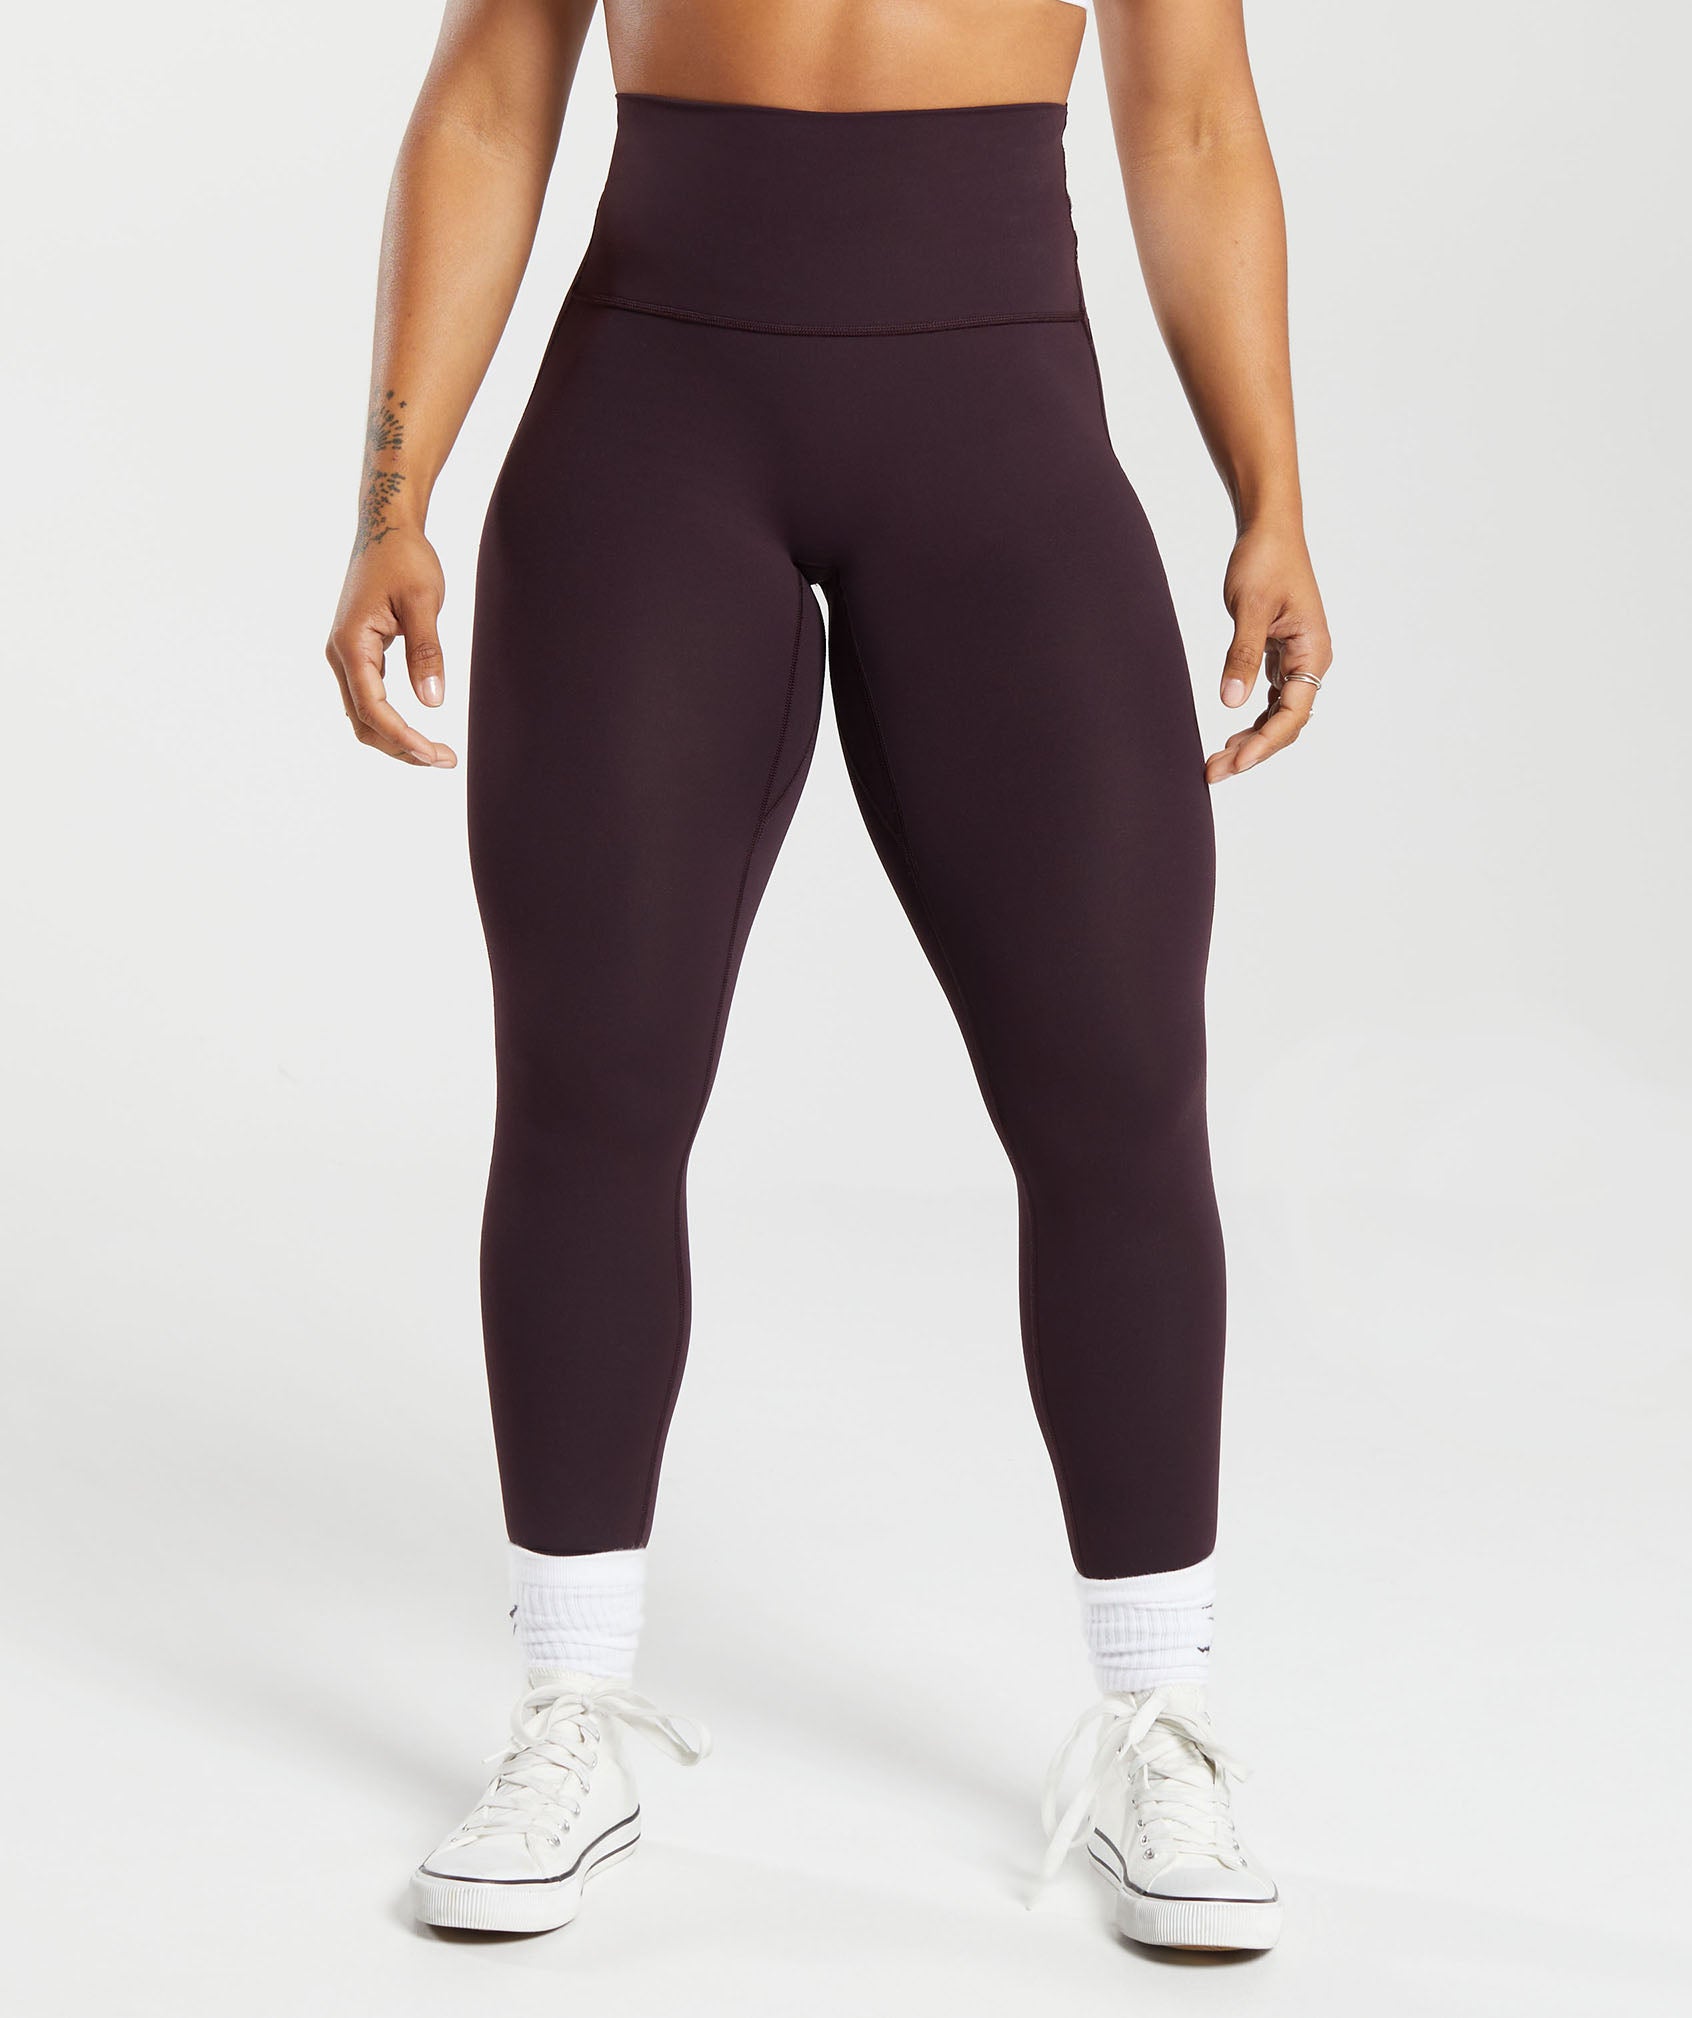 Upgrade your workout with Gymshark Legacy Leggings